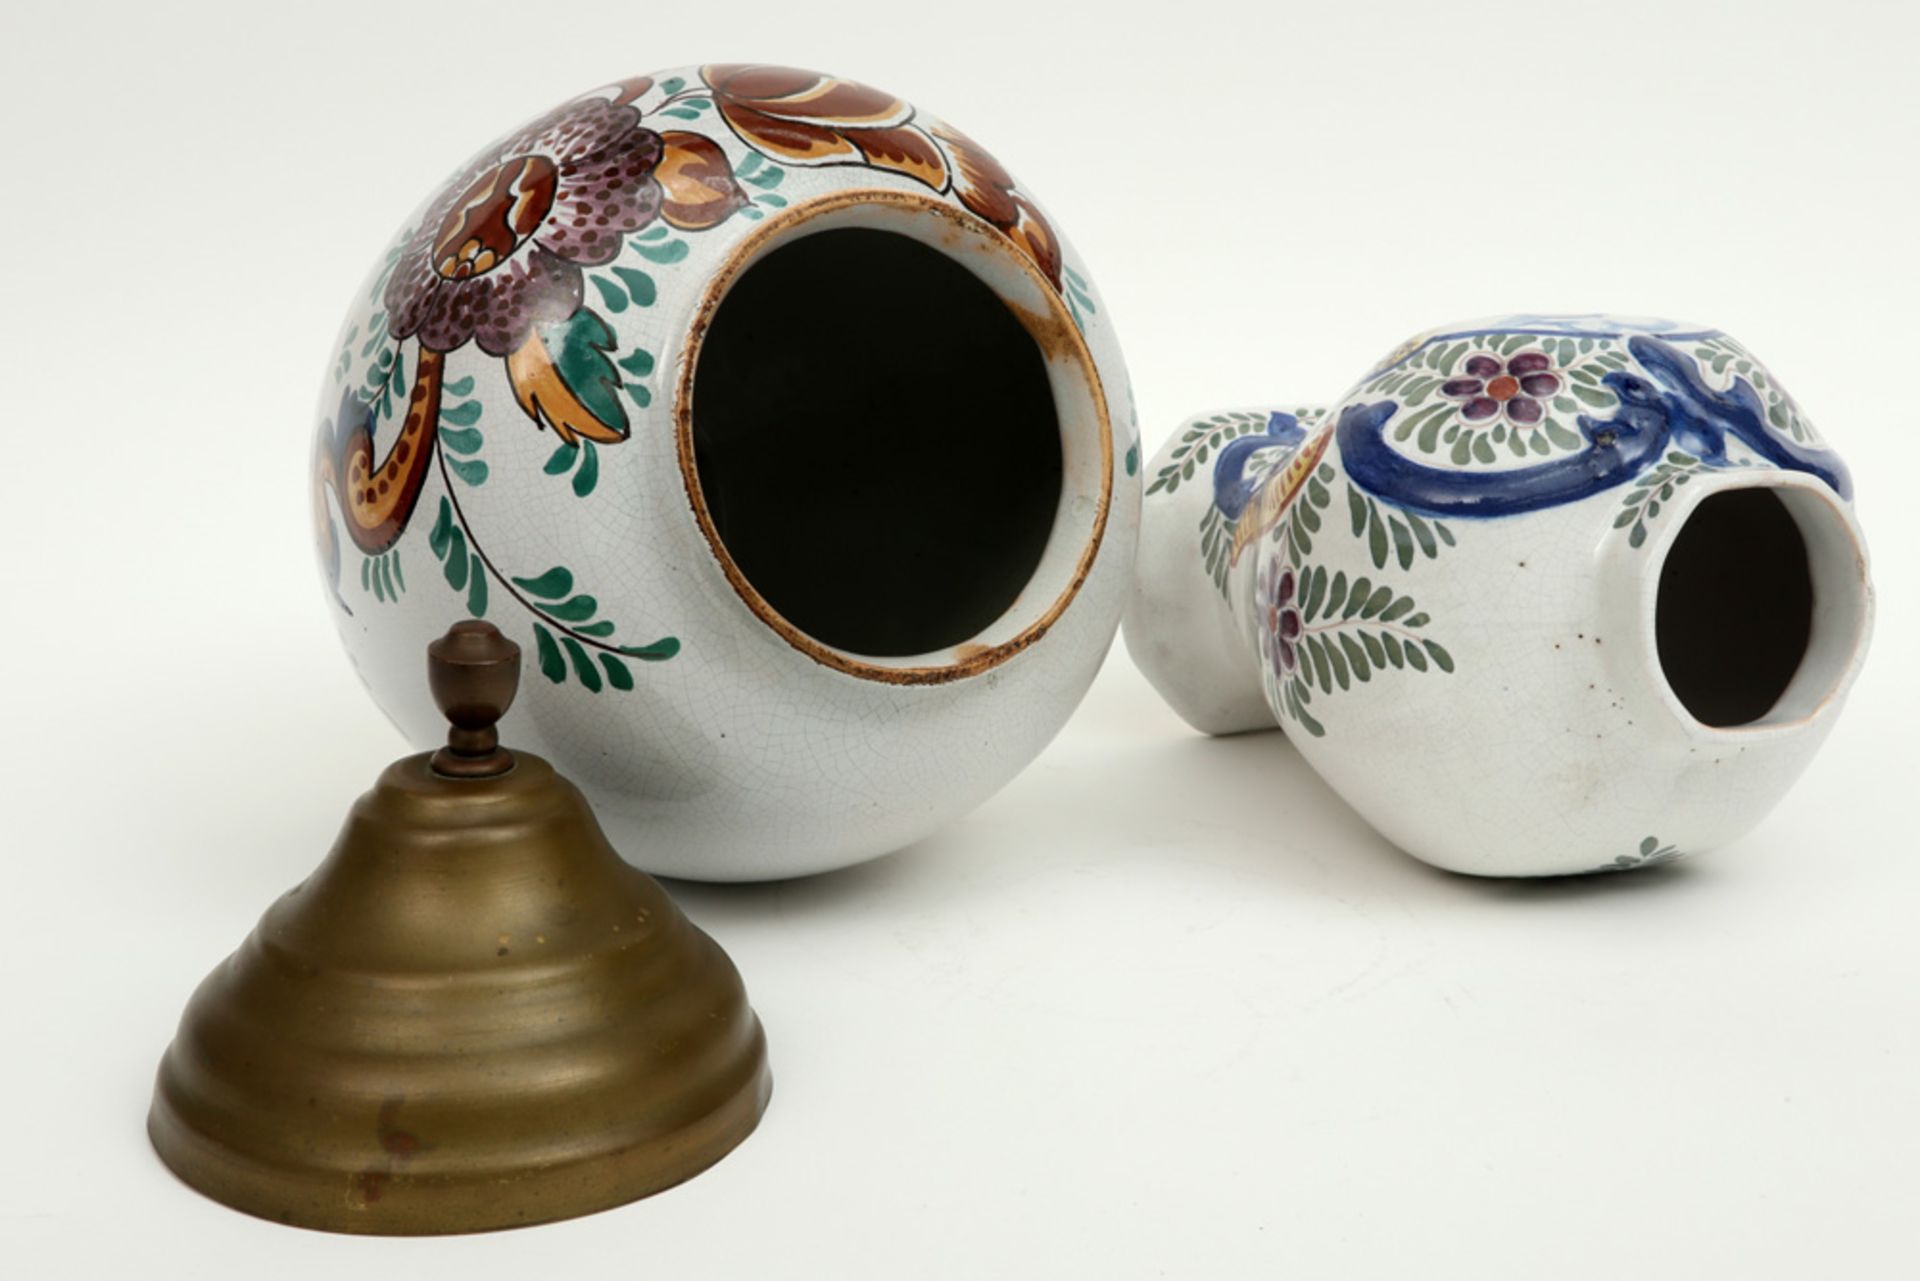 vase and tobacco jar in marked ceramic from Delft with a polychrome decor - Image 3 of 5